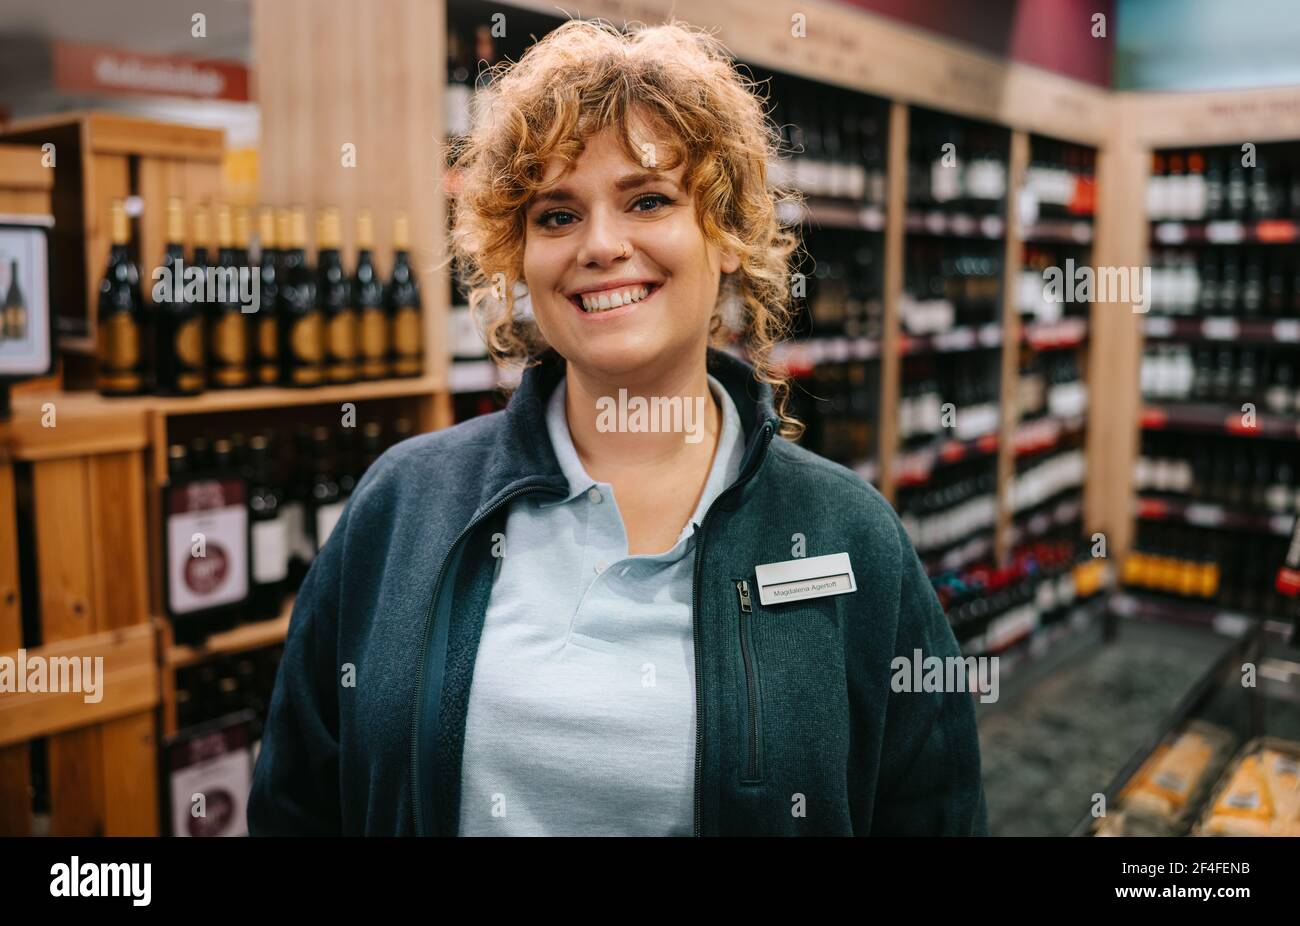 Woman working in a wine store. Portrait of a female connoisseur standing in a liquor store smiling at camera. Stock Photo